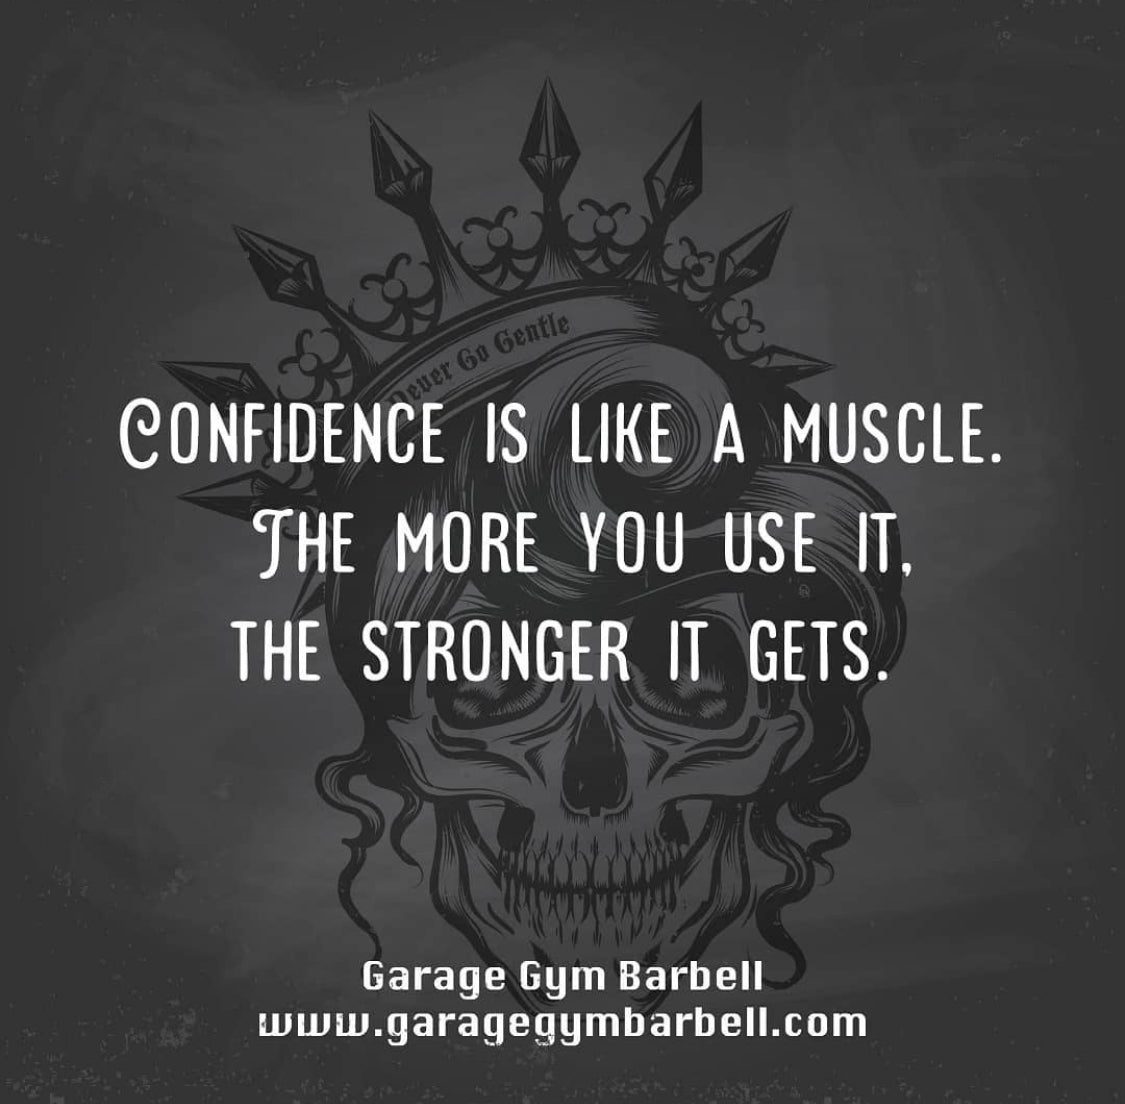 Confidence is like a muscle, the more you use it, the stronger it gets